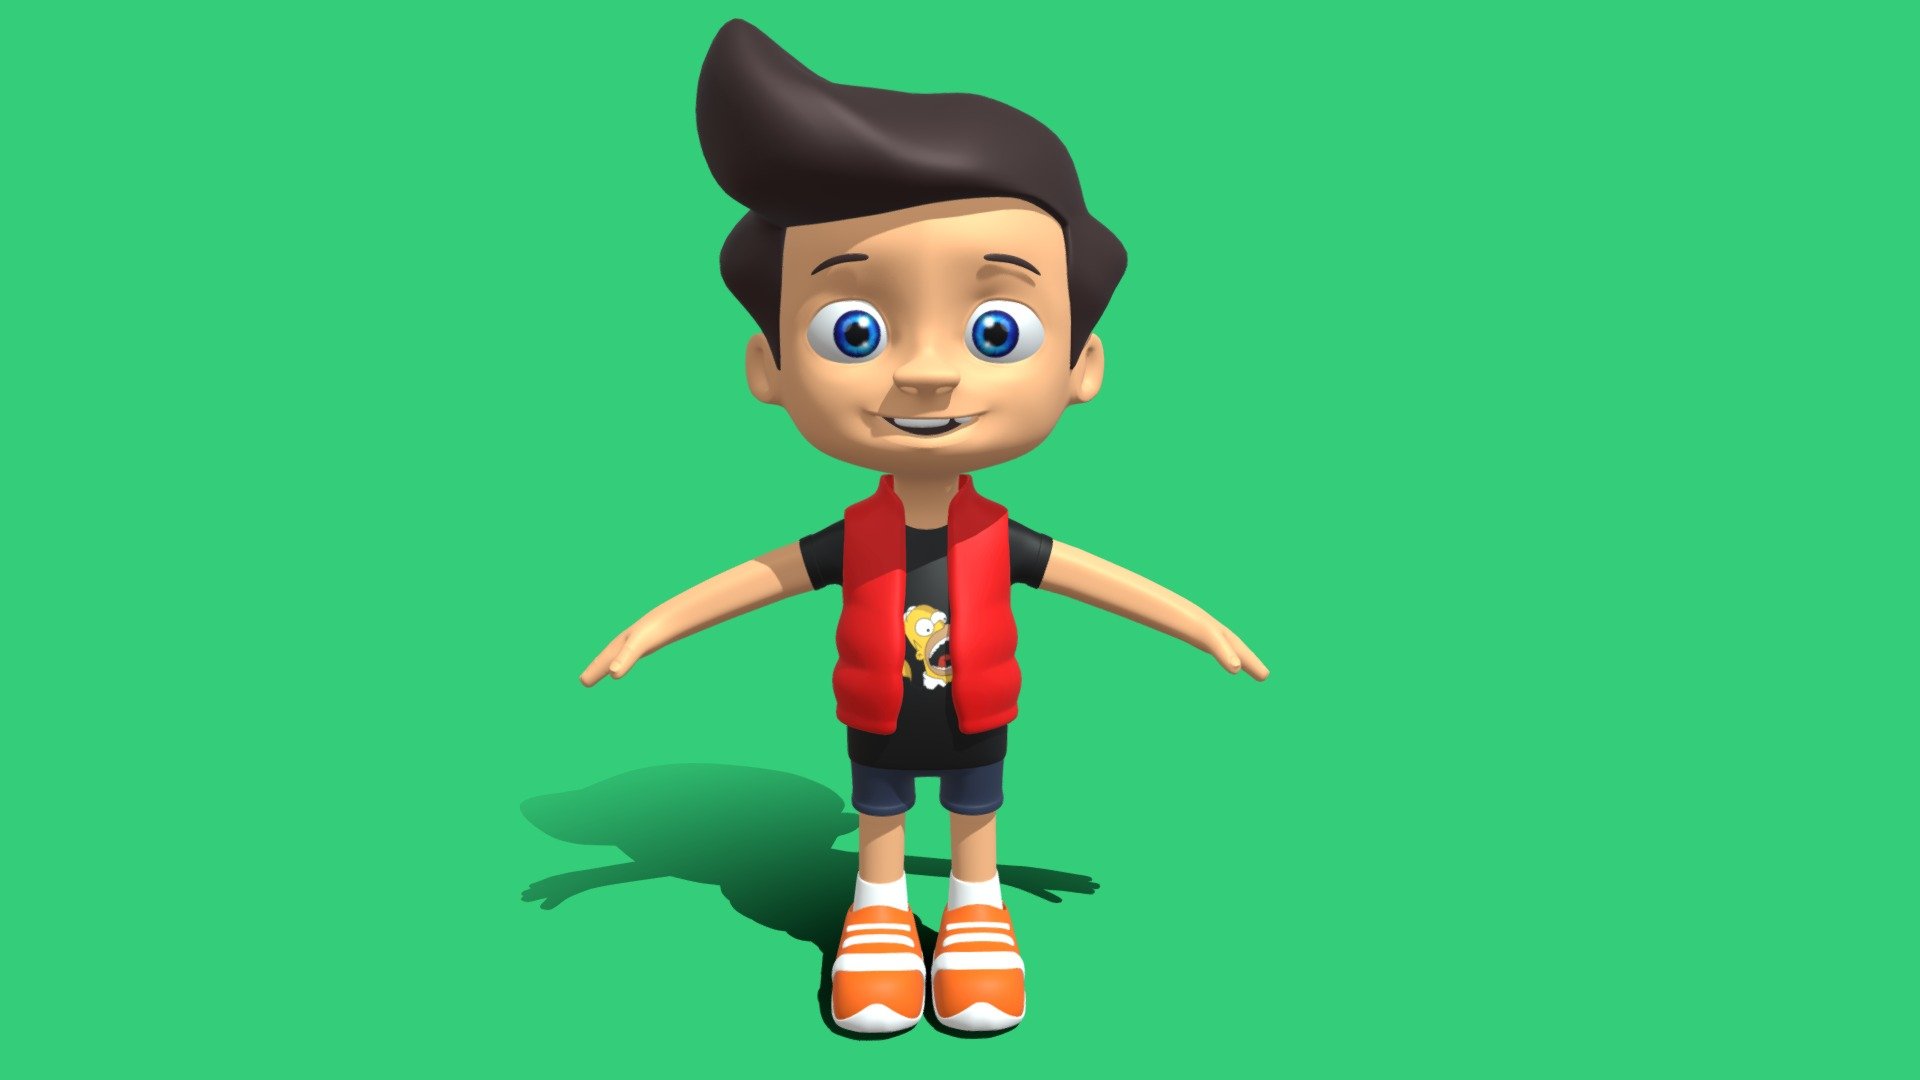 Hello Everyone,
This is a 3d Cartoon character, which is modelded in Autodesk Maya 3D and Textured in Adobe Photoshop - 3D Cartoon Character - 3D model by Gajendra Jaiswal (@Gajendrajaiswal) 3d model